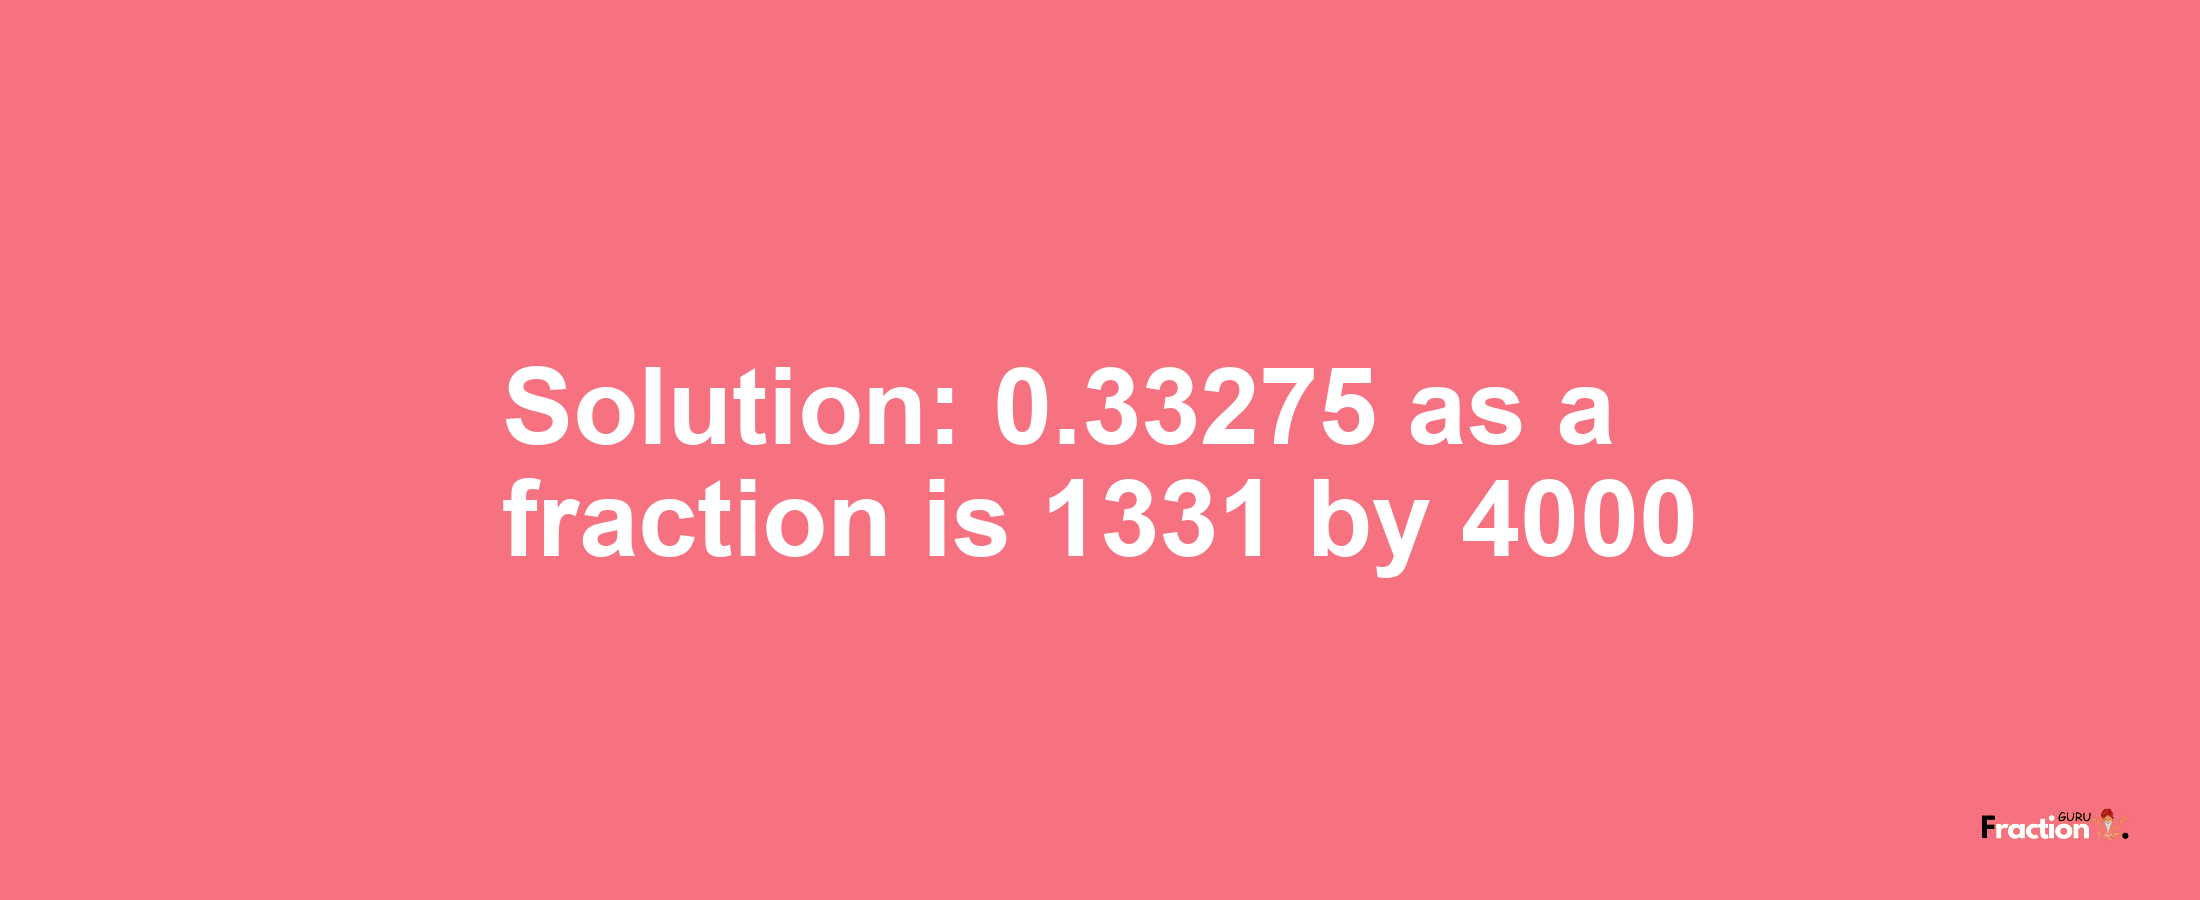 Solution:0.33275 as a fraction is 1331/4000